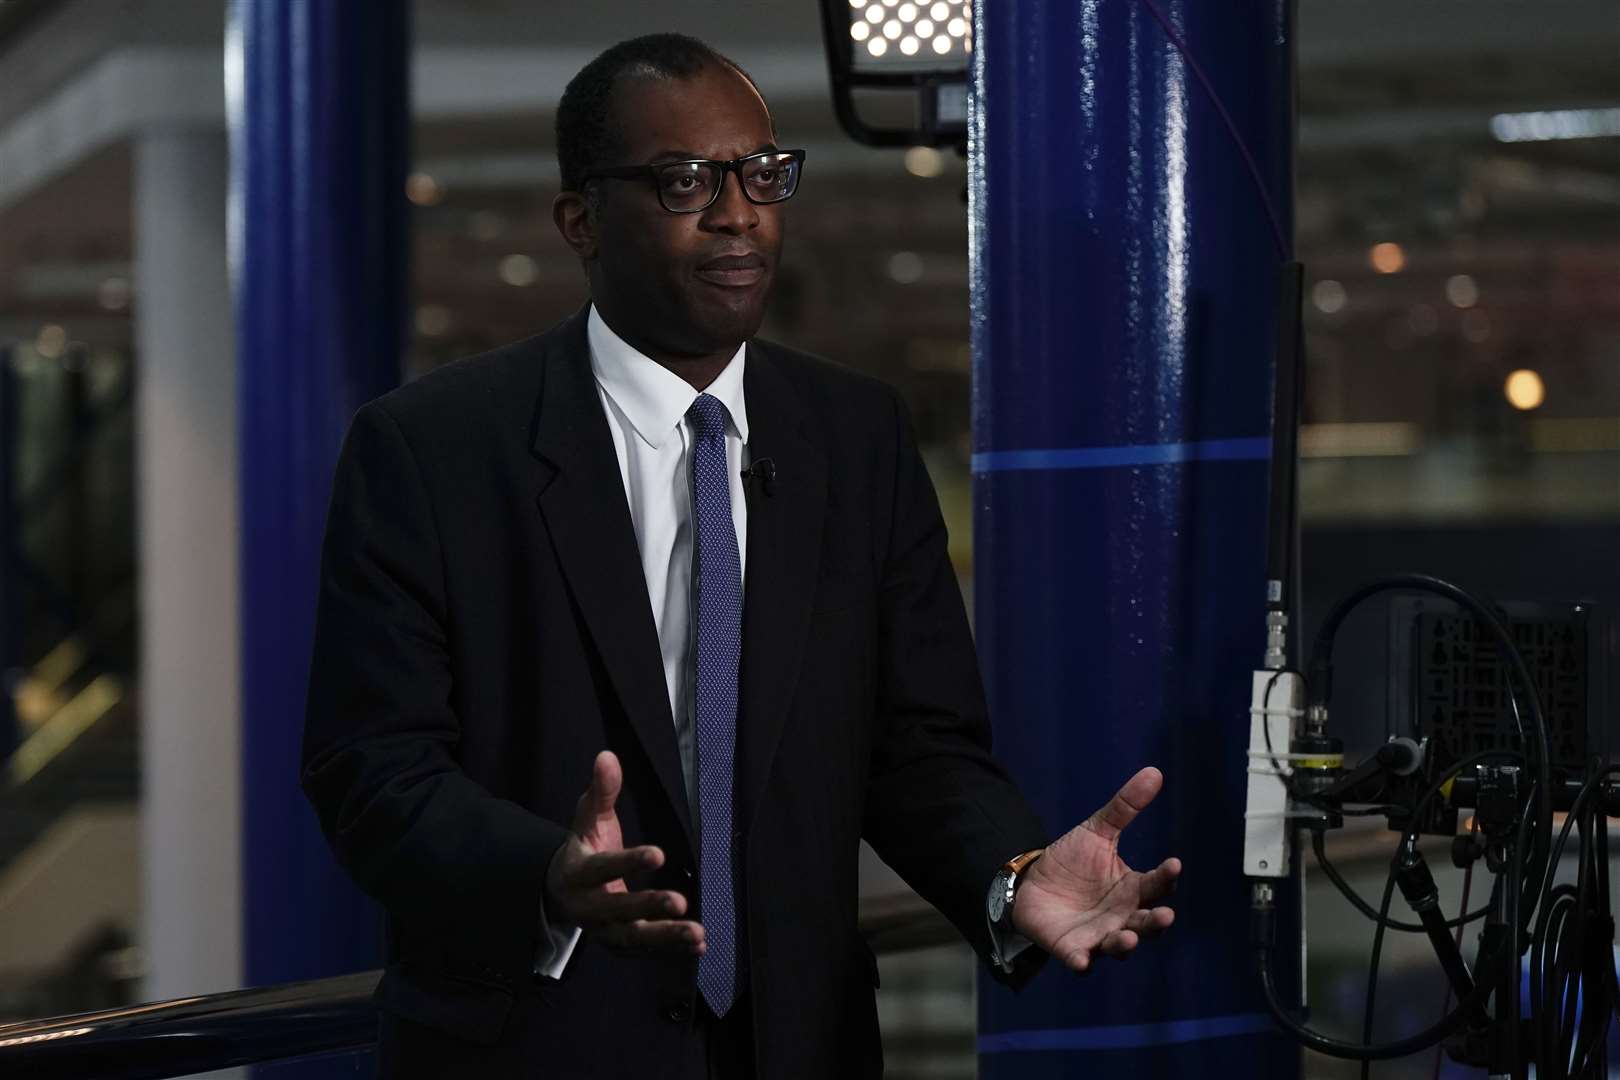 Chancellor Kwasi Kwarteng is attending the Tory conference in Birmingham (Aaron Chown/PA)